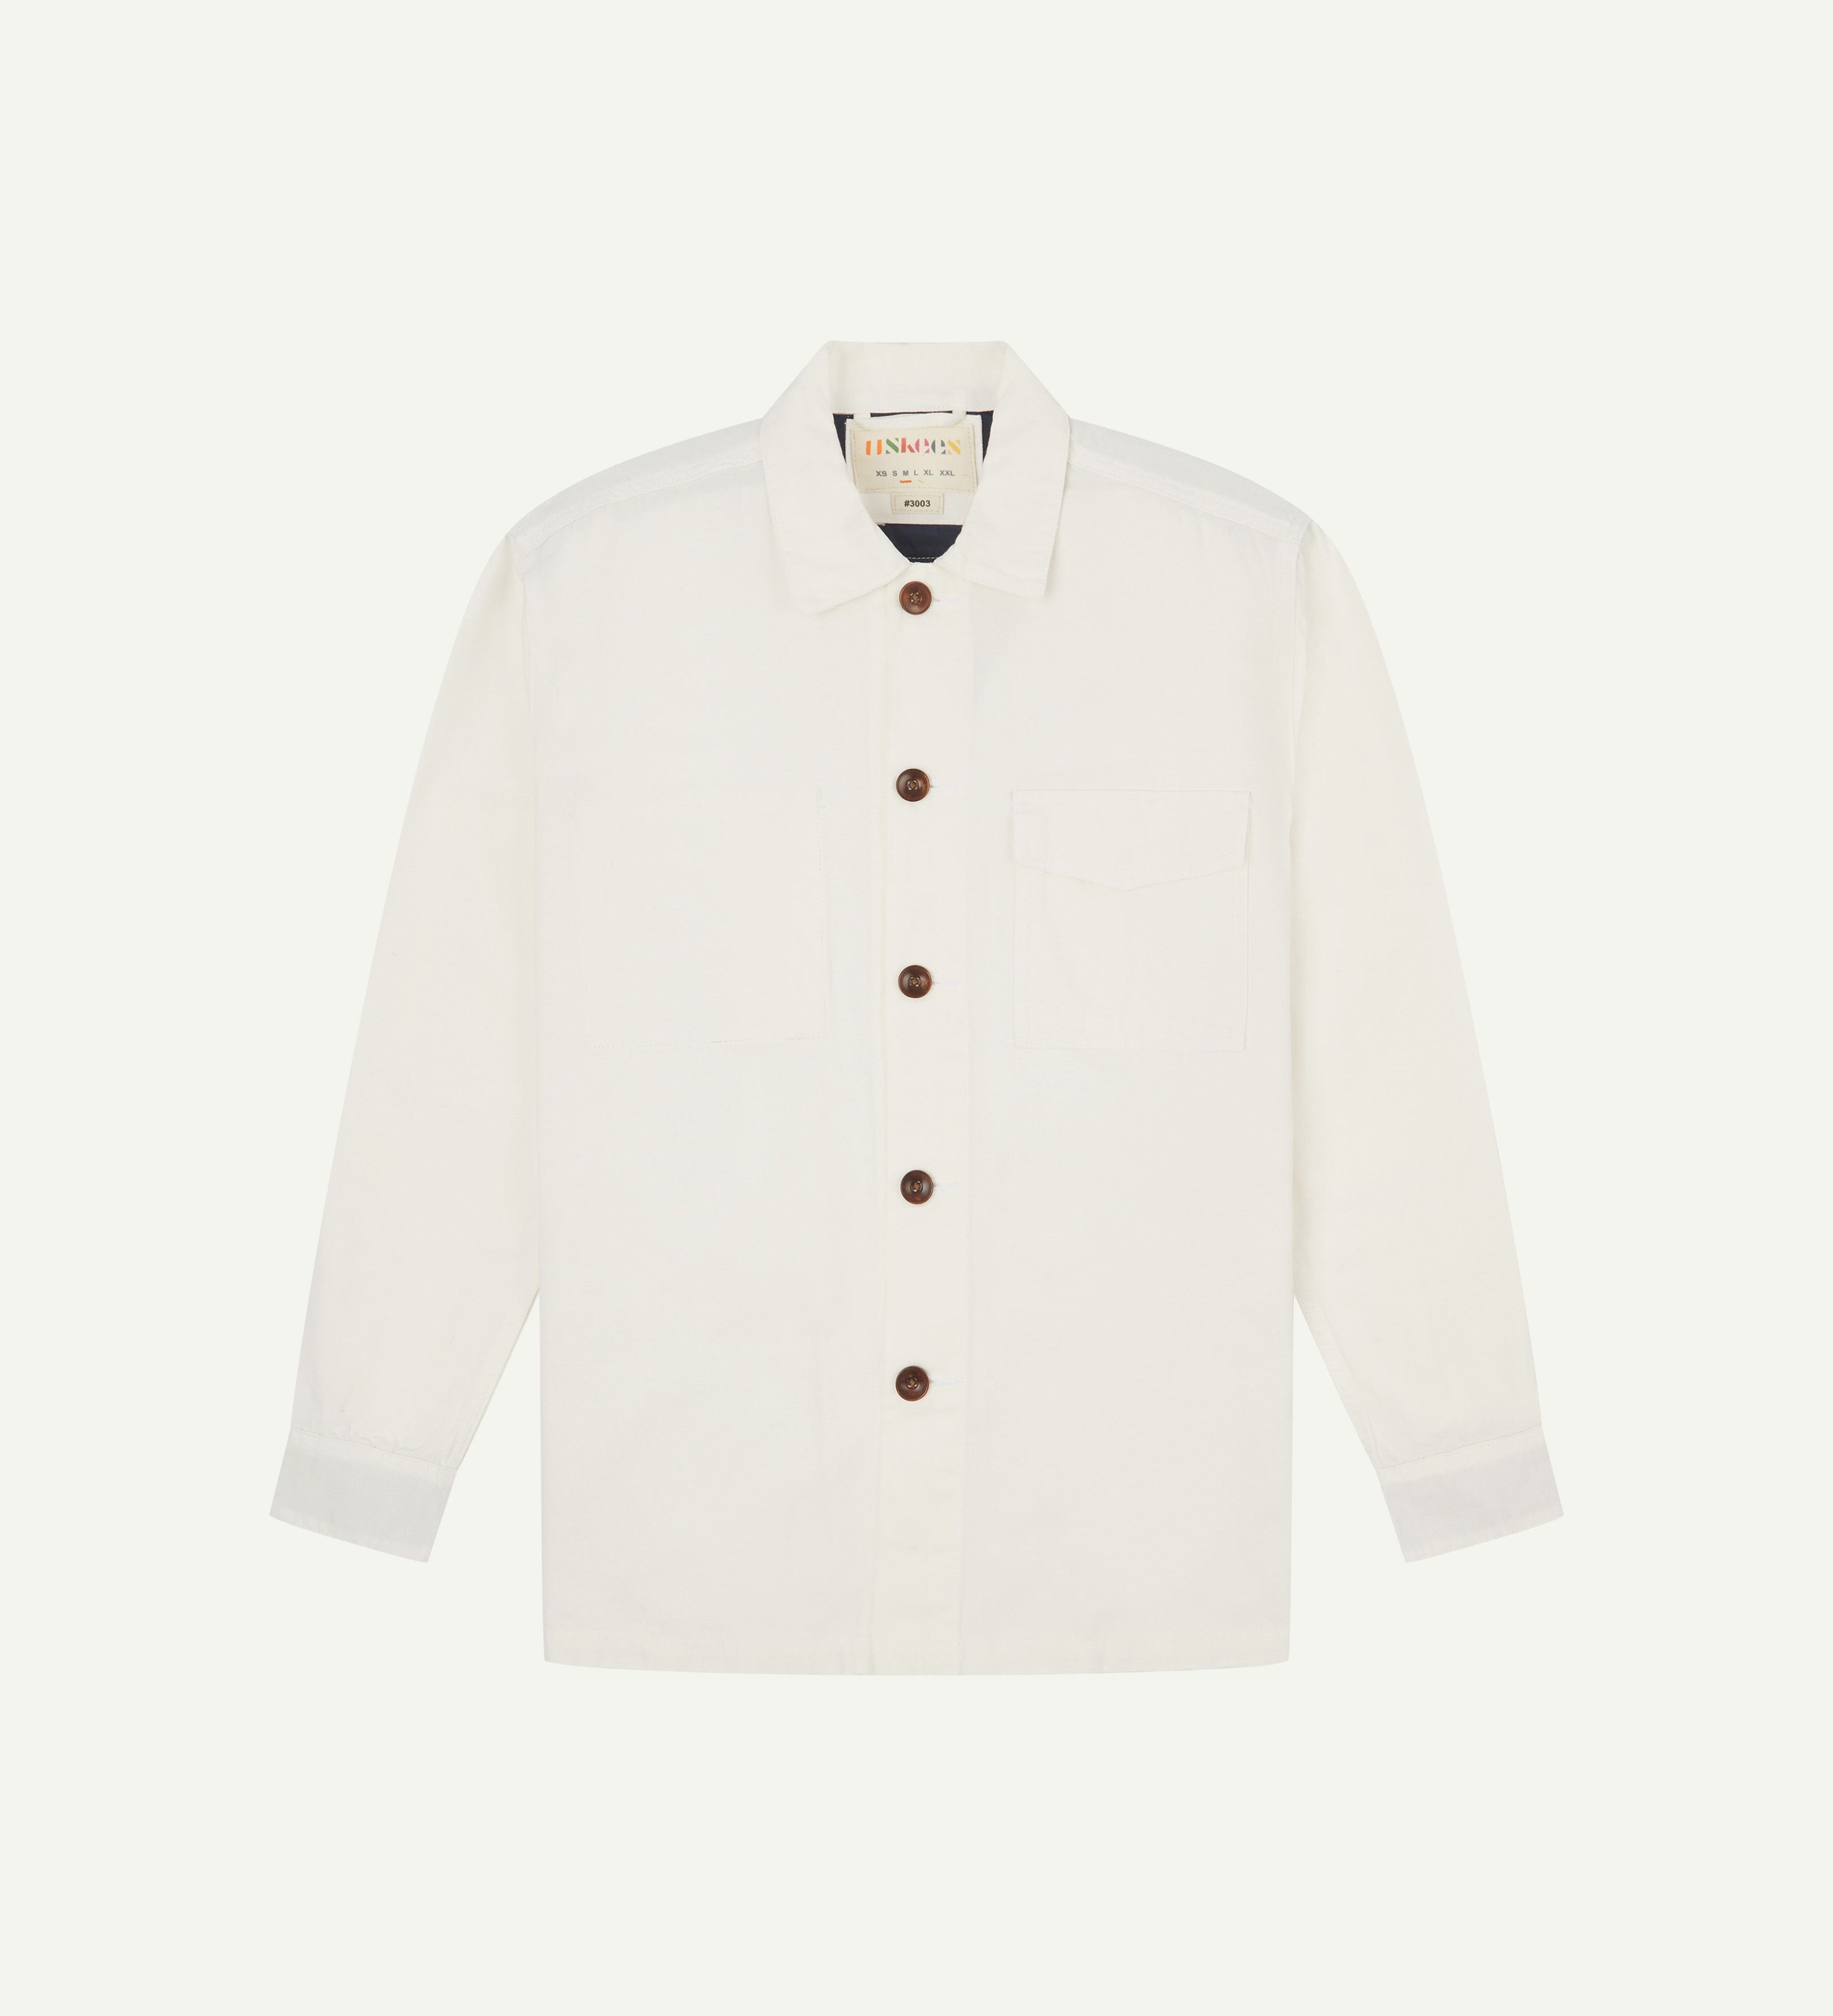 Front flat view of cream buttoned 3003 workshirt from Uskees. Showing breast pocket, navy yoke lining and brown corozo buttons